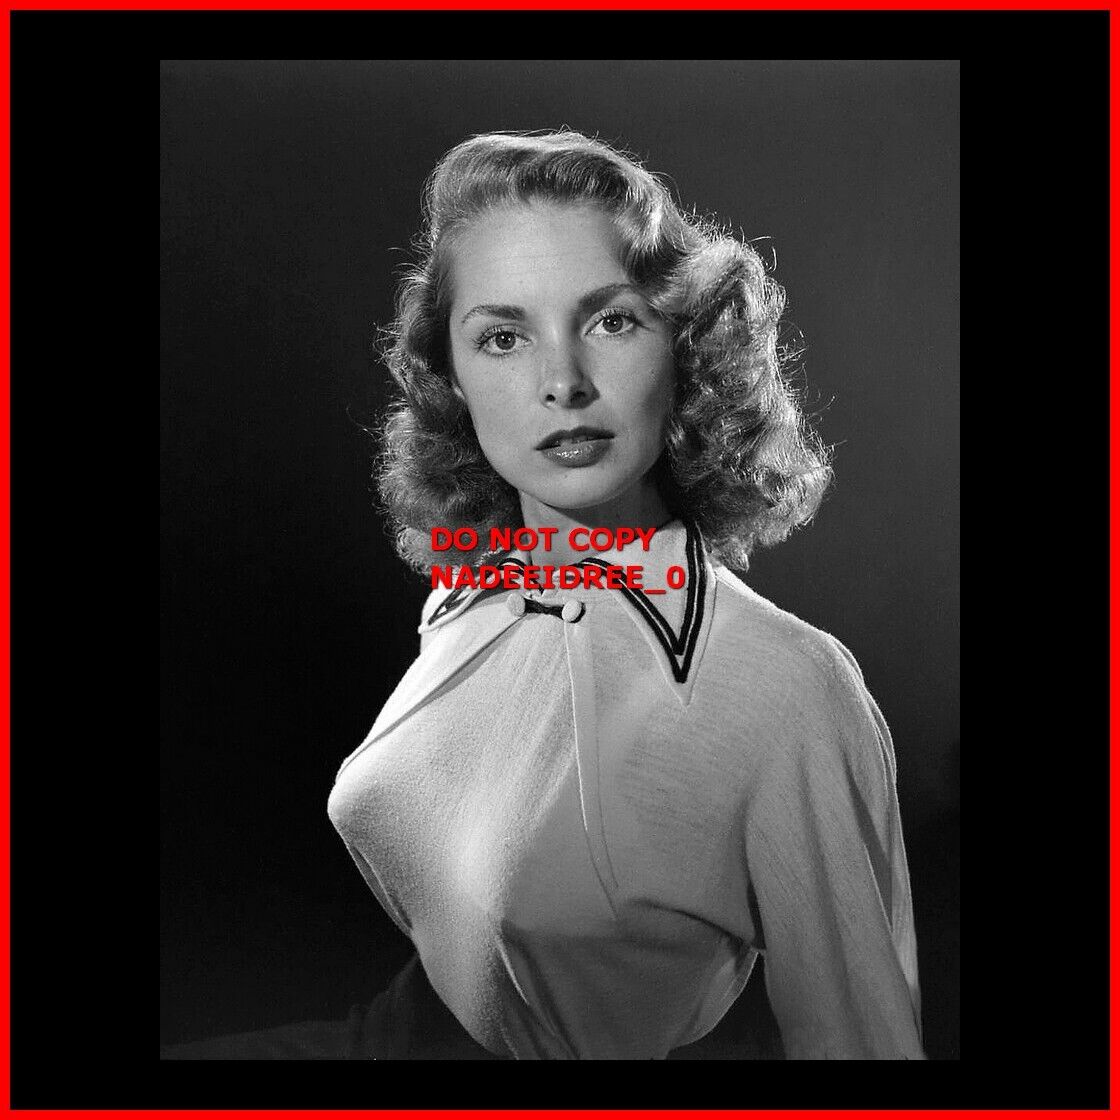 JANET LEIGH HOLLYWOOD LEGENDARY AMERICAN ACTRESS SINGER SEXY HOT GIRL 8X10 PHOTO